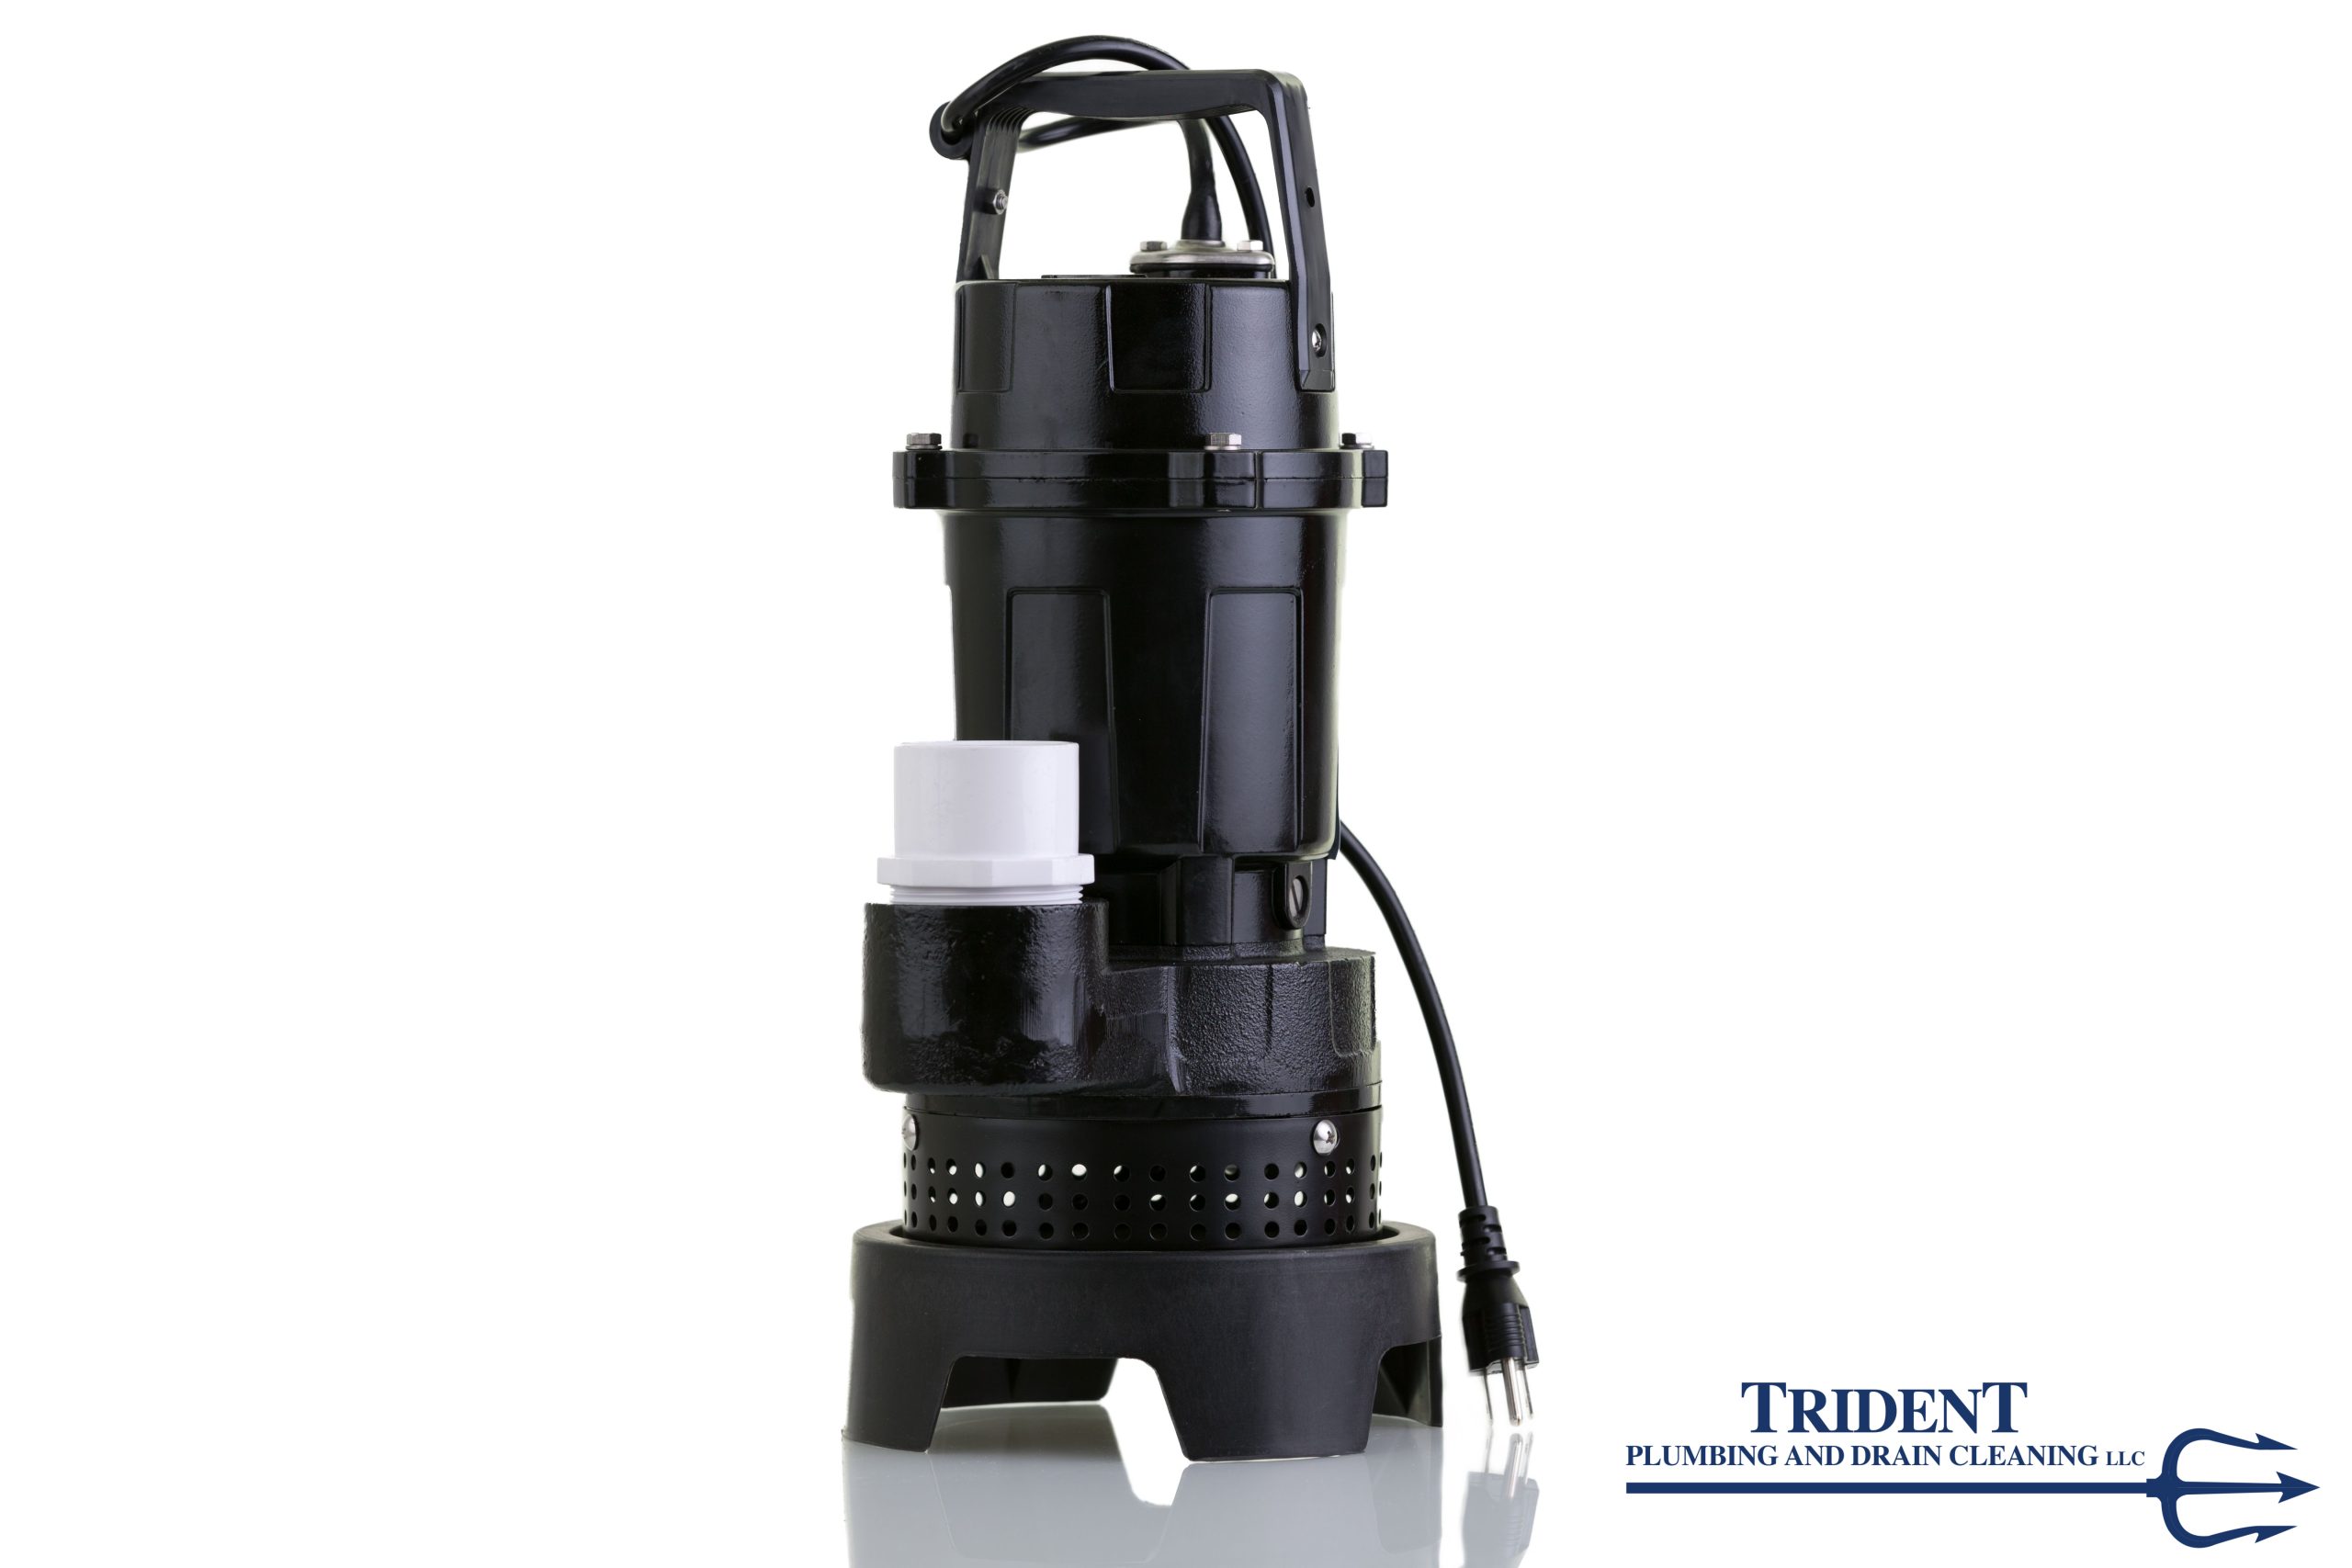 Do You Need A Sump Pump? Call Us For Installation In Duvall!